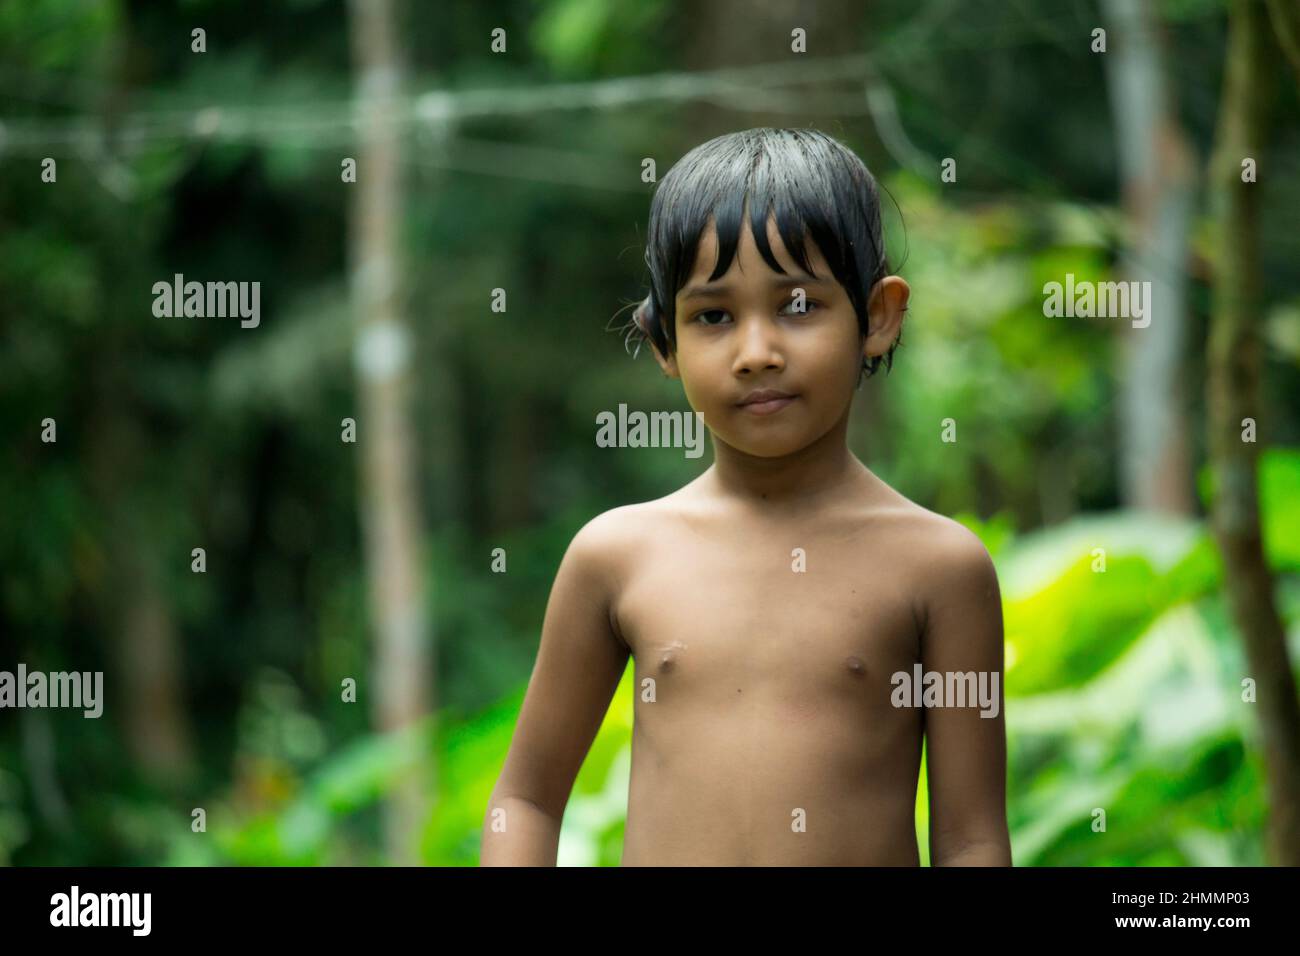 03-Oct-2021, Barisal, Bangladesh. Little baby on a green background Stock Photo